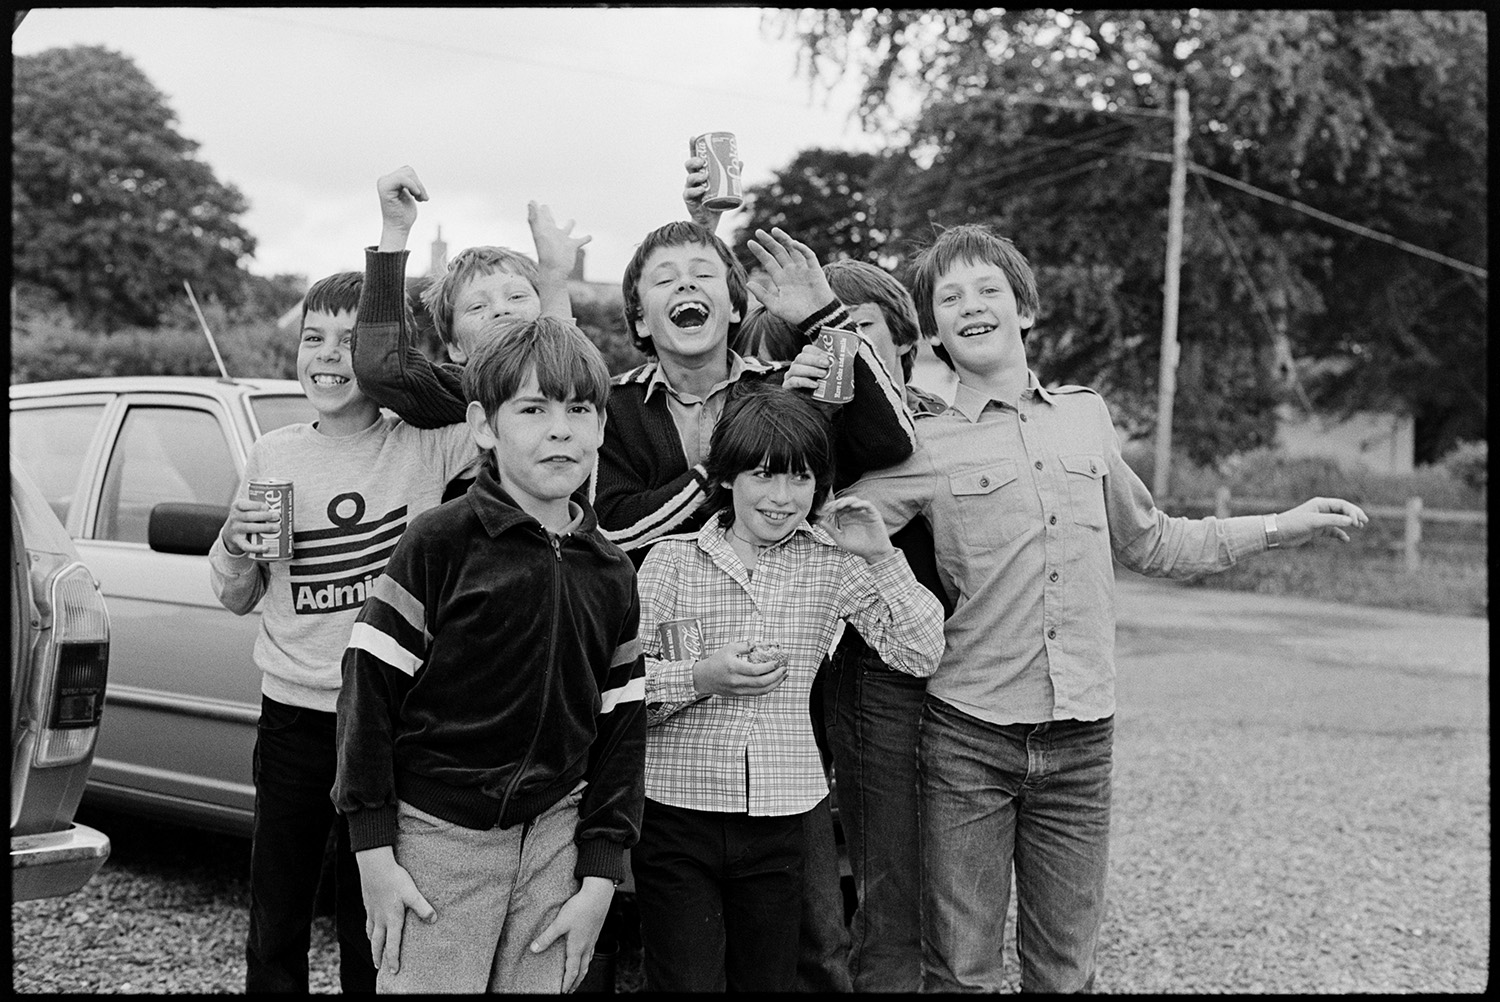 Crowd of children laughing.
[A group of children in a car park, holding cans of Coke, laughing and waving to the camera.]